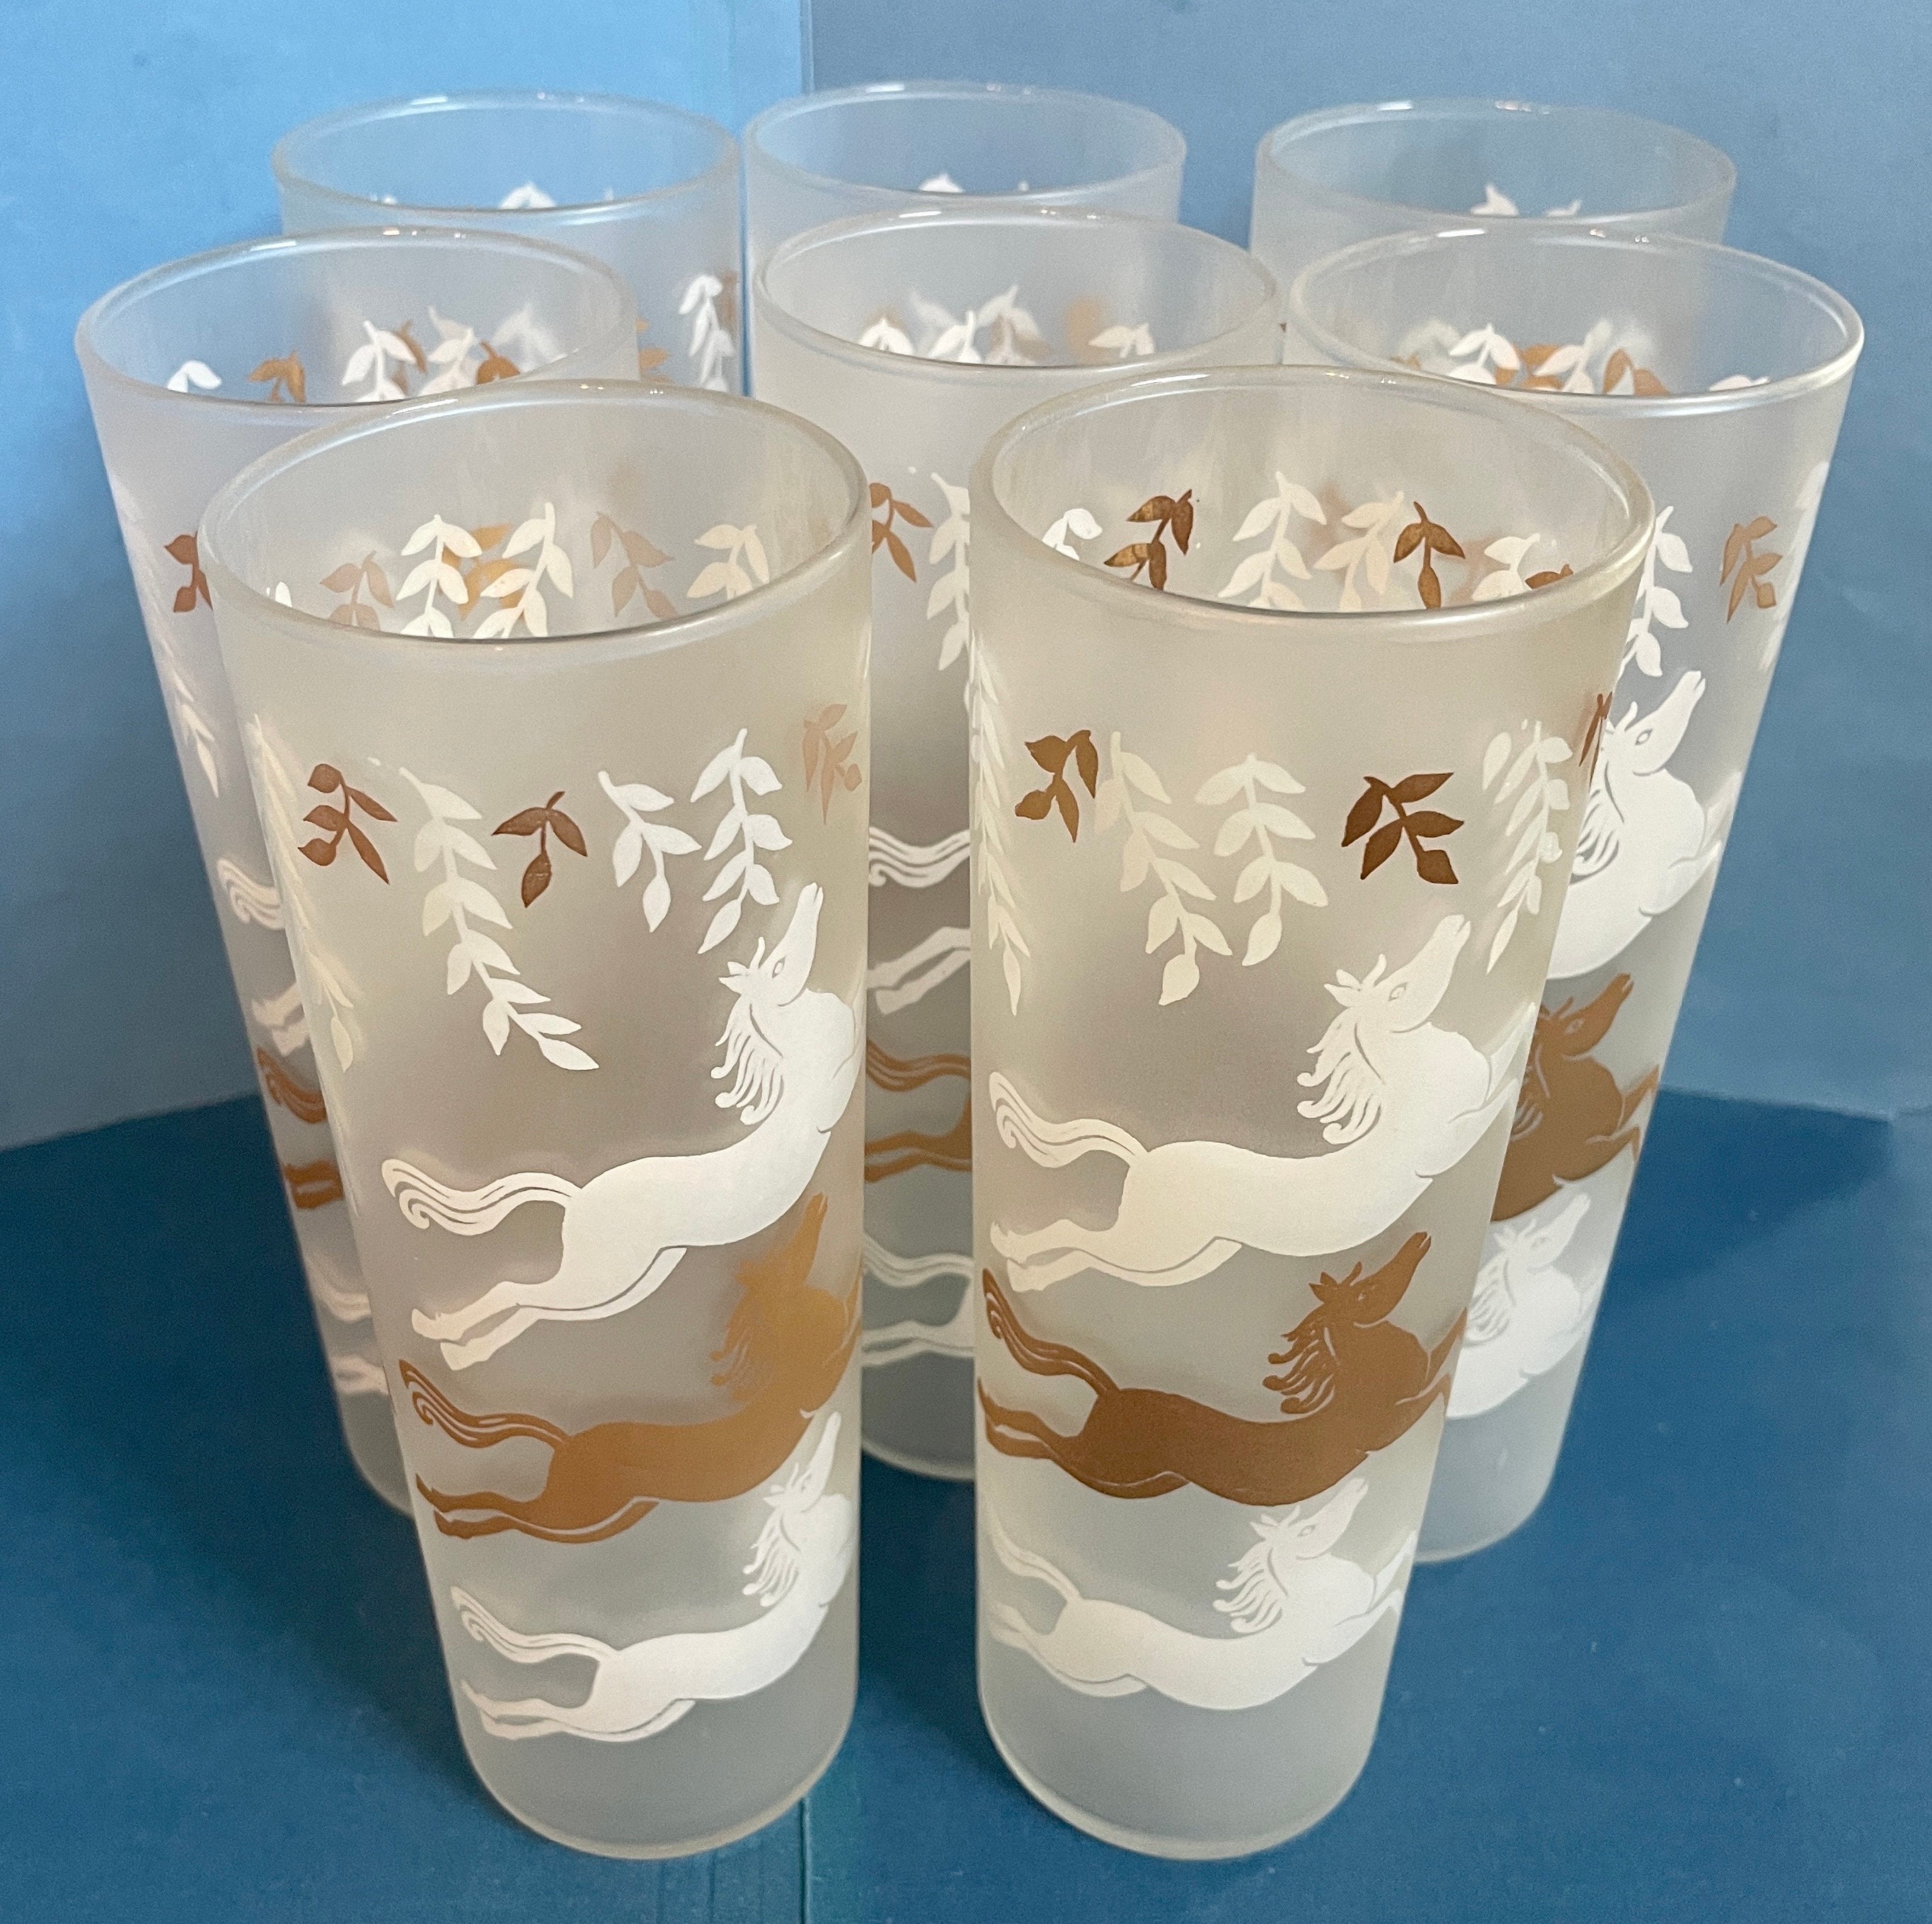 Frosted Pony Short Drinking Glass Set – Stylish Equestrian